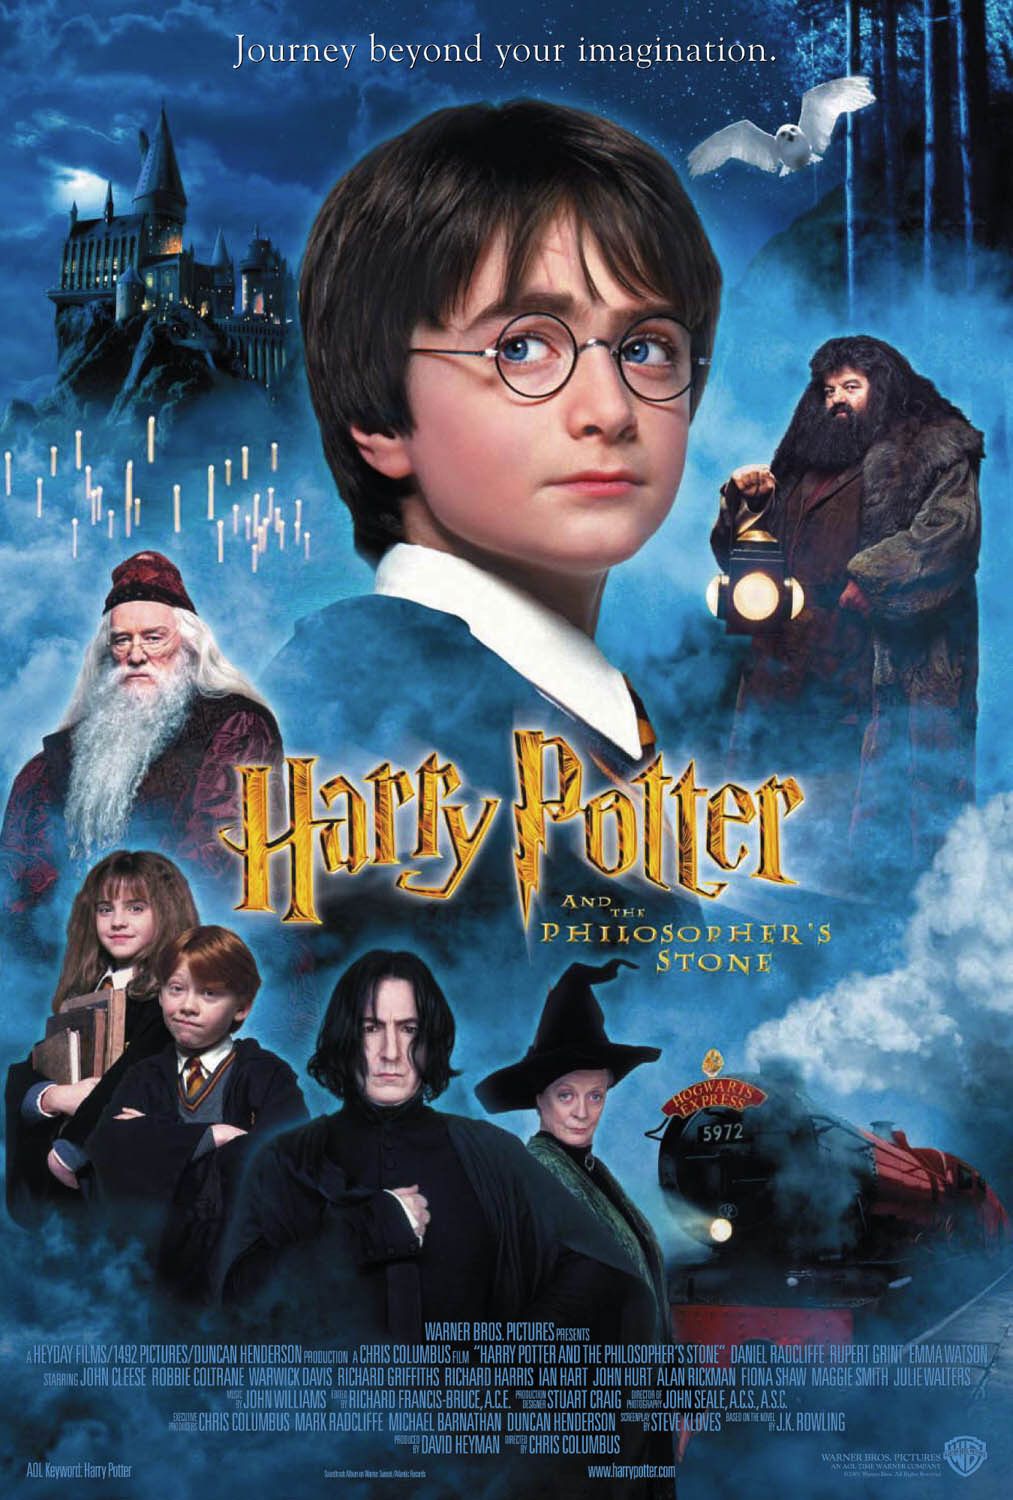 Harry Potter and the Philosopher's Stone | Warner Bros